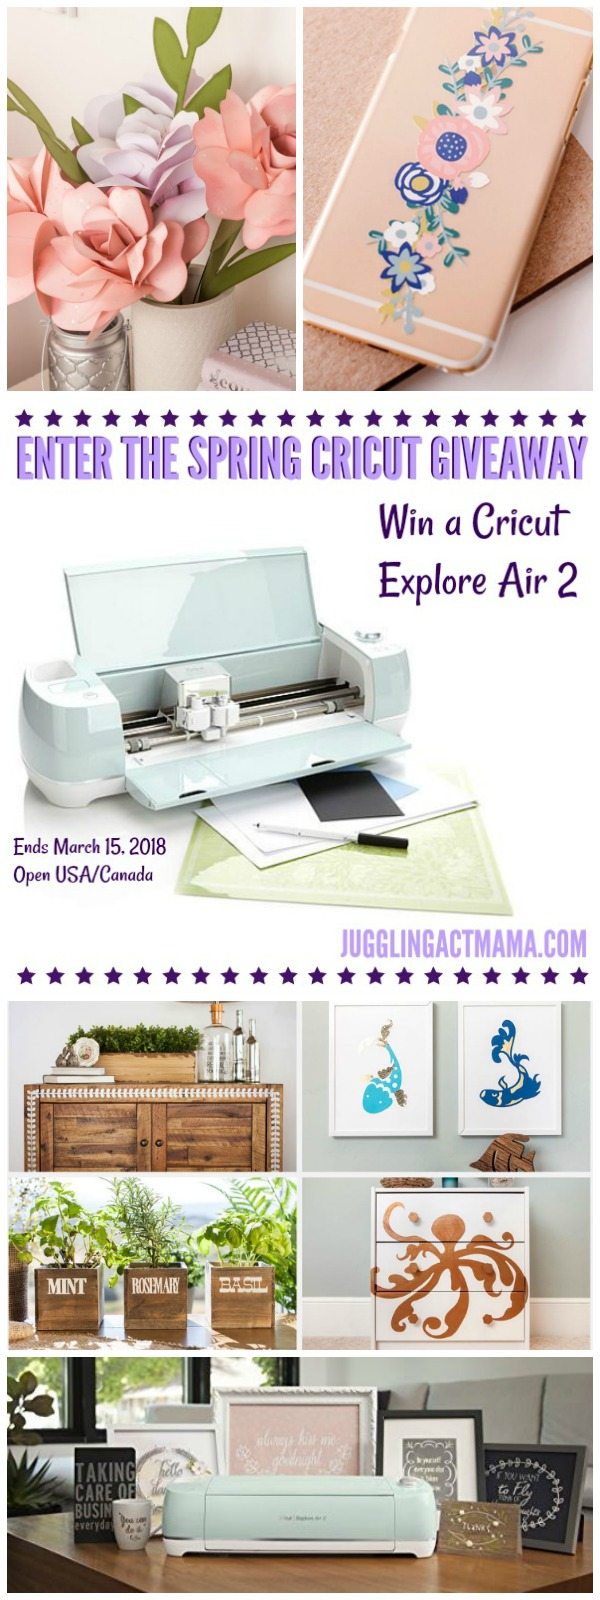 Enter to win a Cricut Explore Air 2 from JugglingActMama- Ends March 15 2018